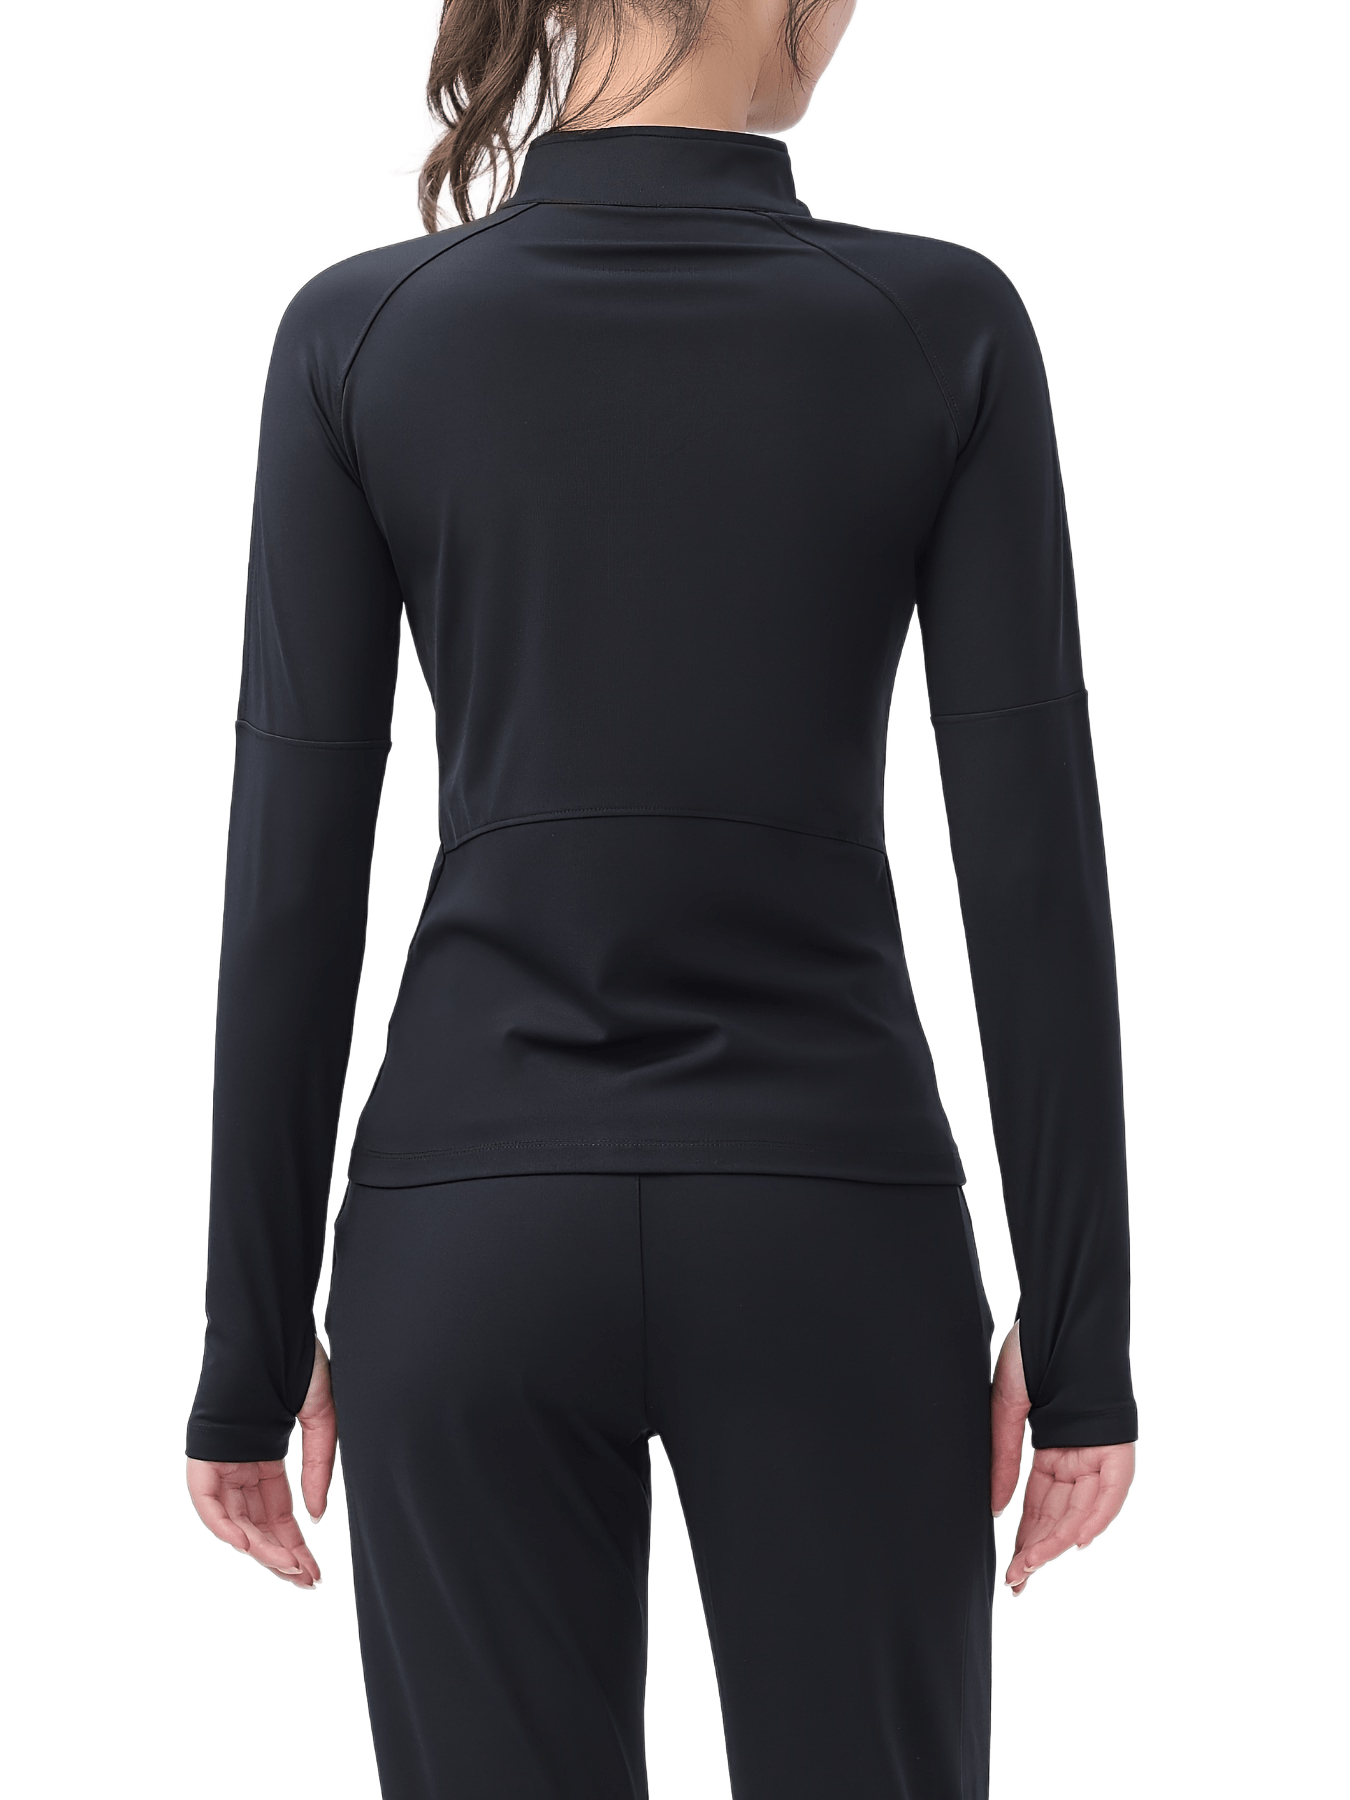 Women Long Sleeve Workout Athletic Gym Short Sweatshirts High-Quality  Quick-Dry Wyz19953 - China Round Neck Shirt and Shirt price